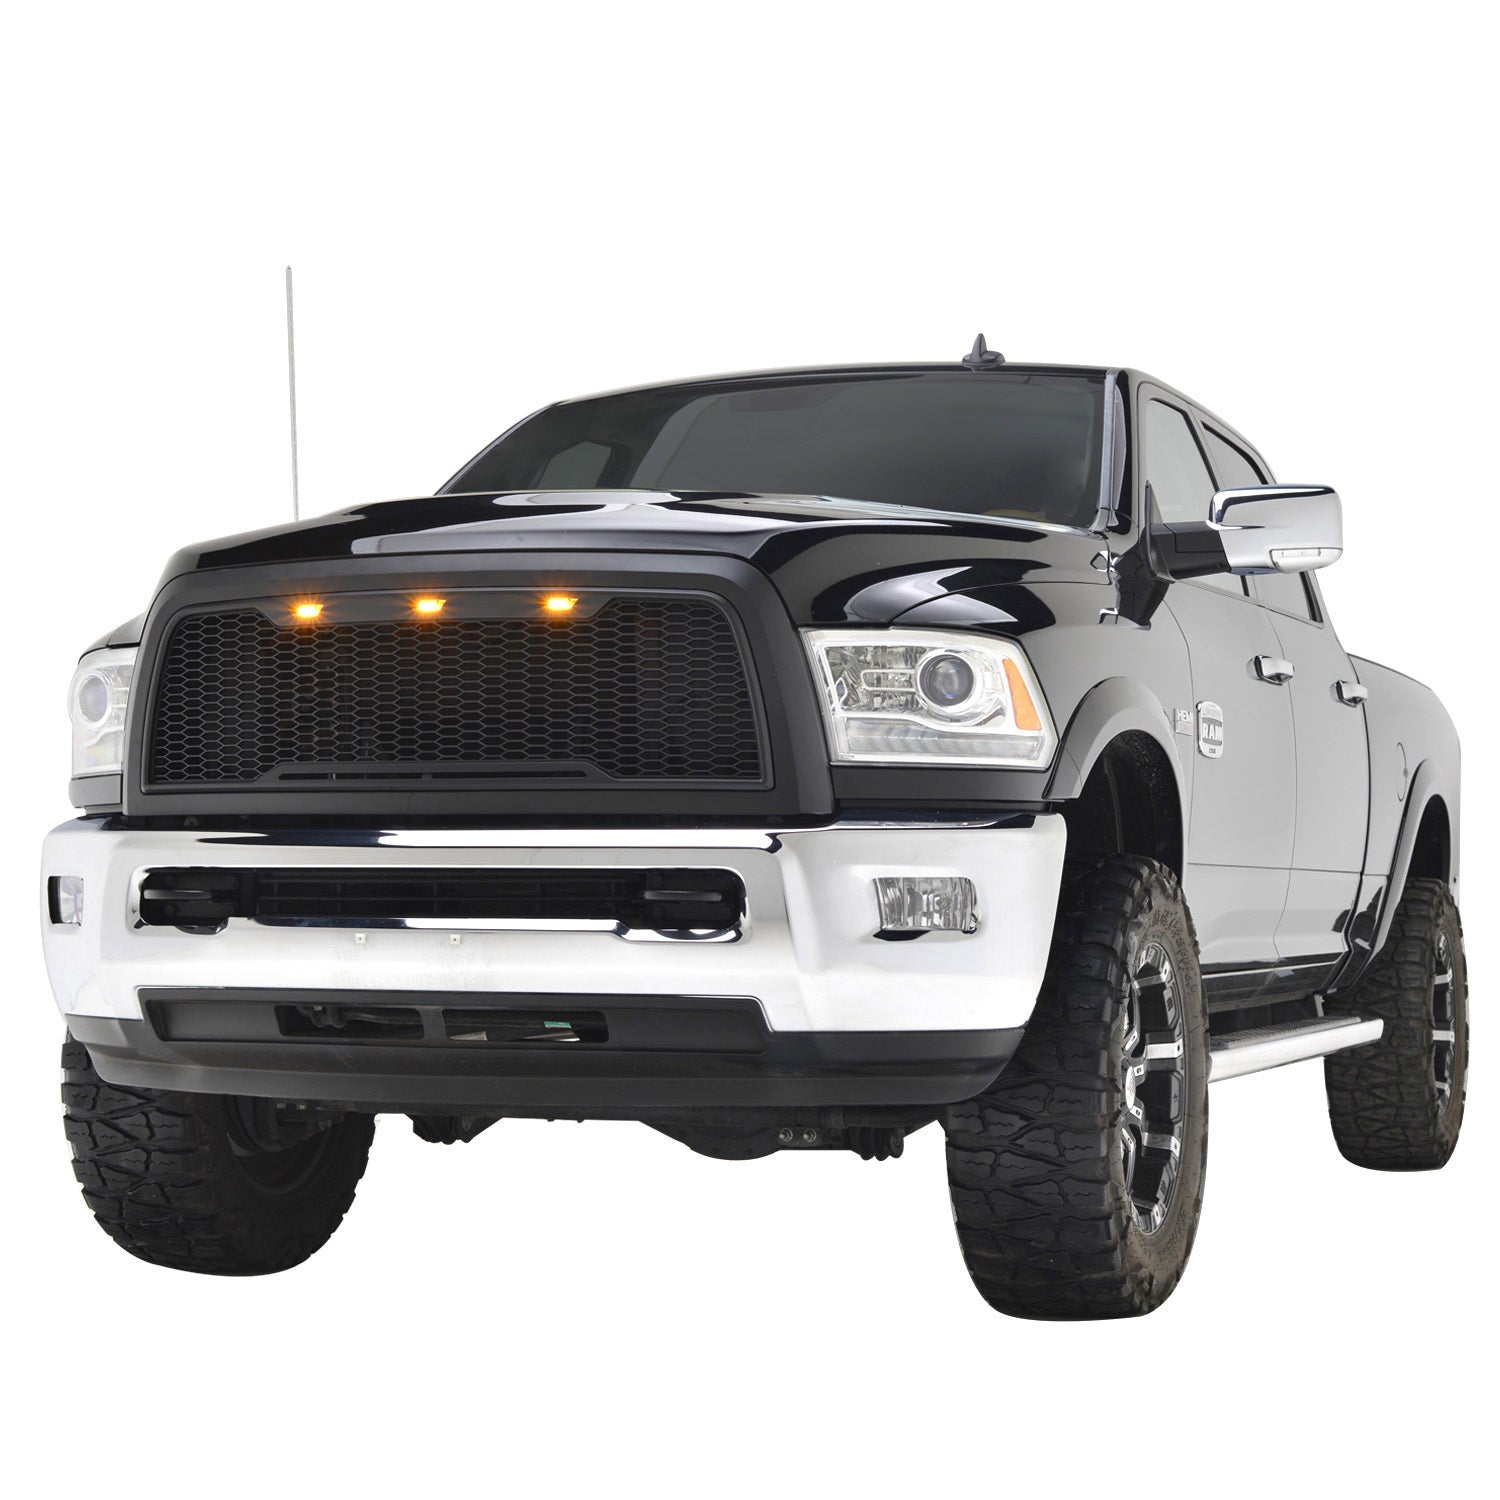 Spec-D Tuning Matte Black Rebel Style Front Grille w/Amber LED Lights  Compatible with 2010-2018 Dodge Ram 2500 3500 Truck